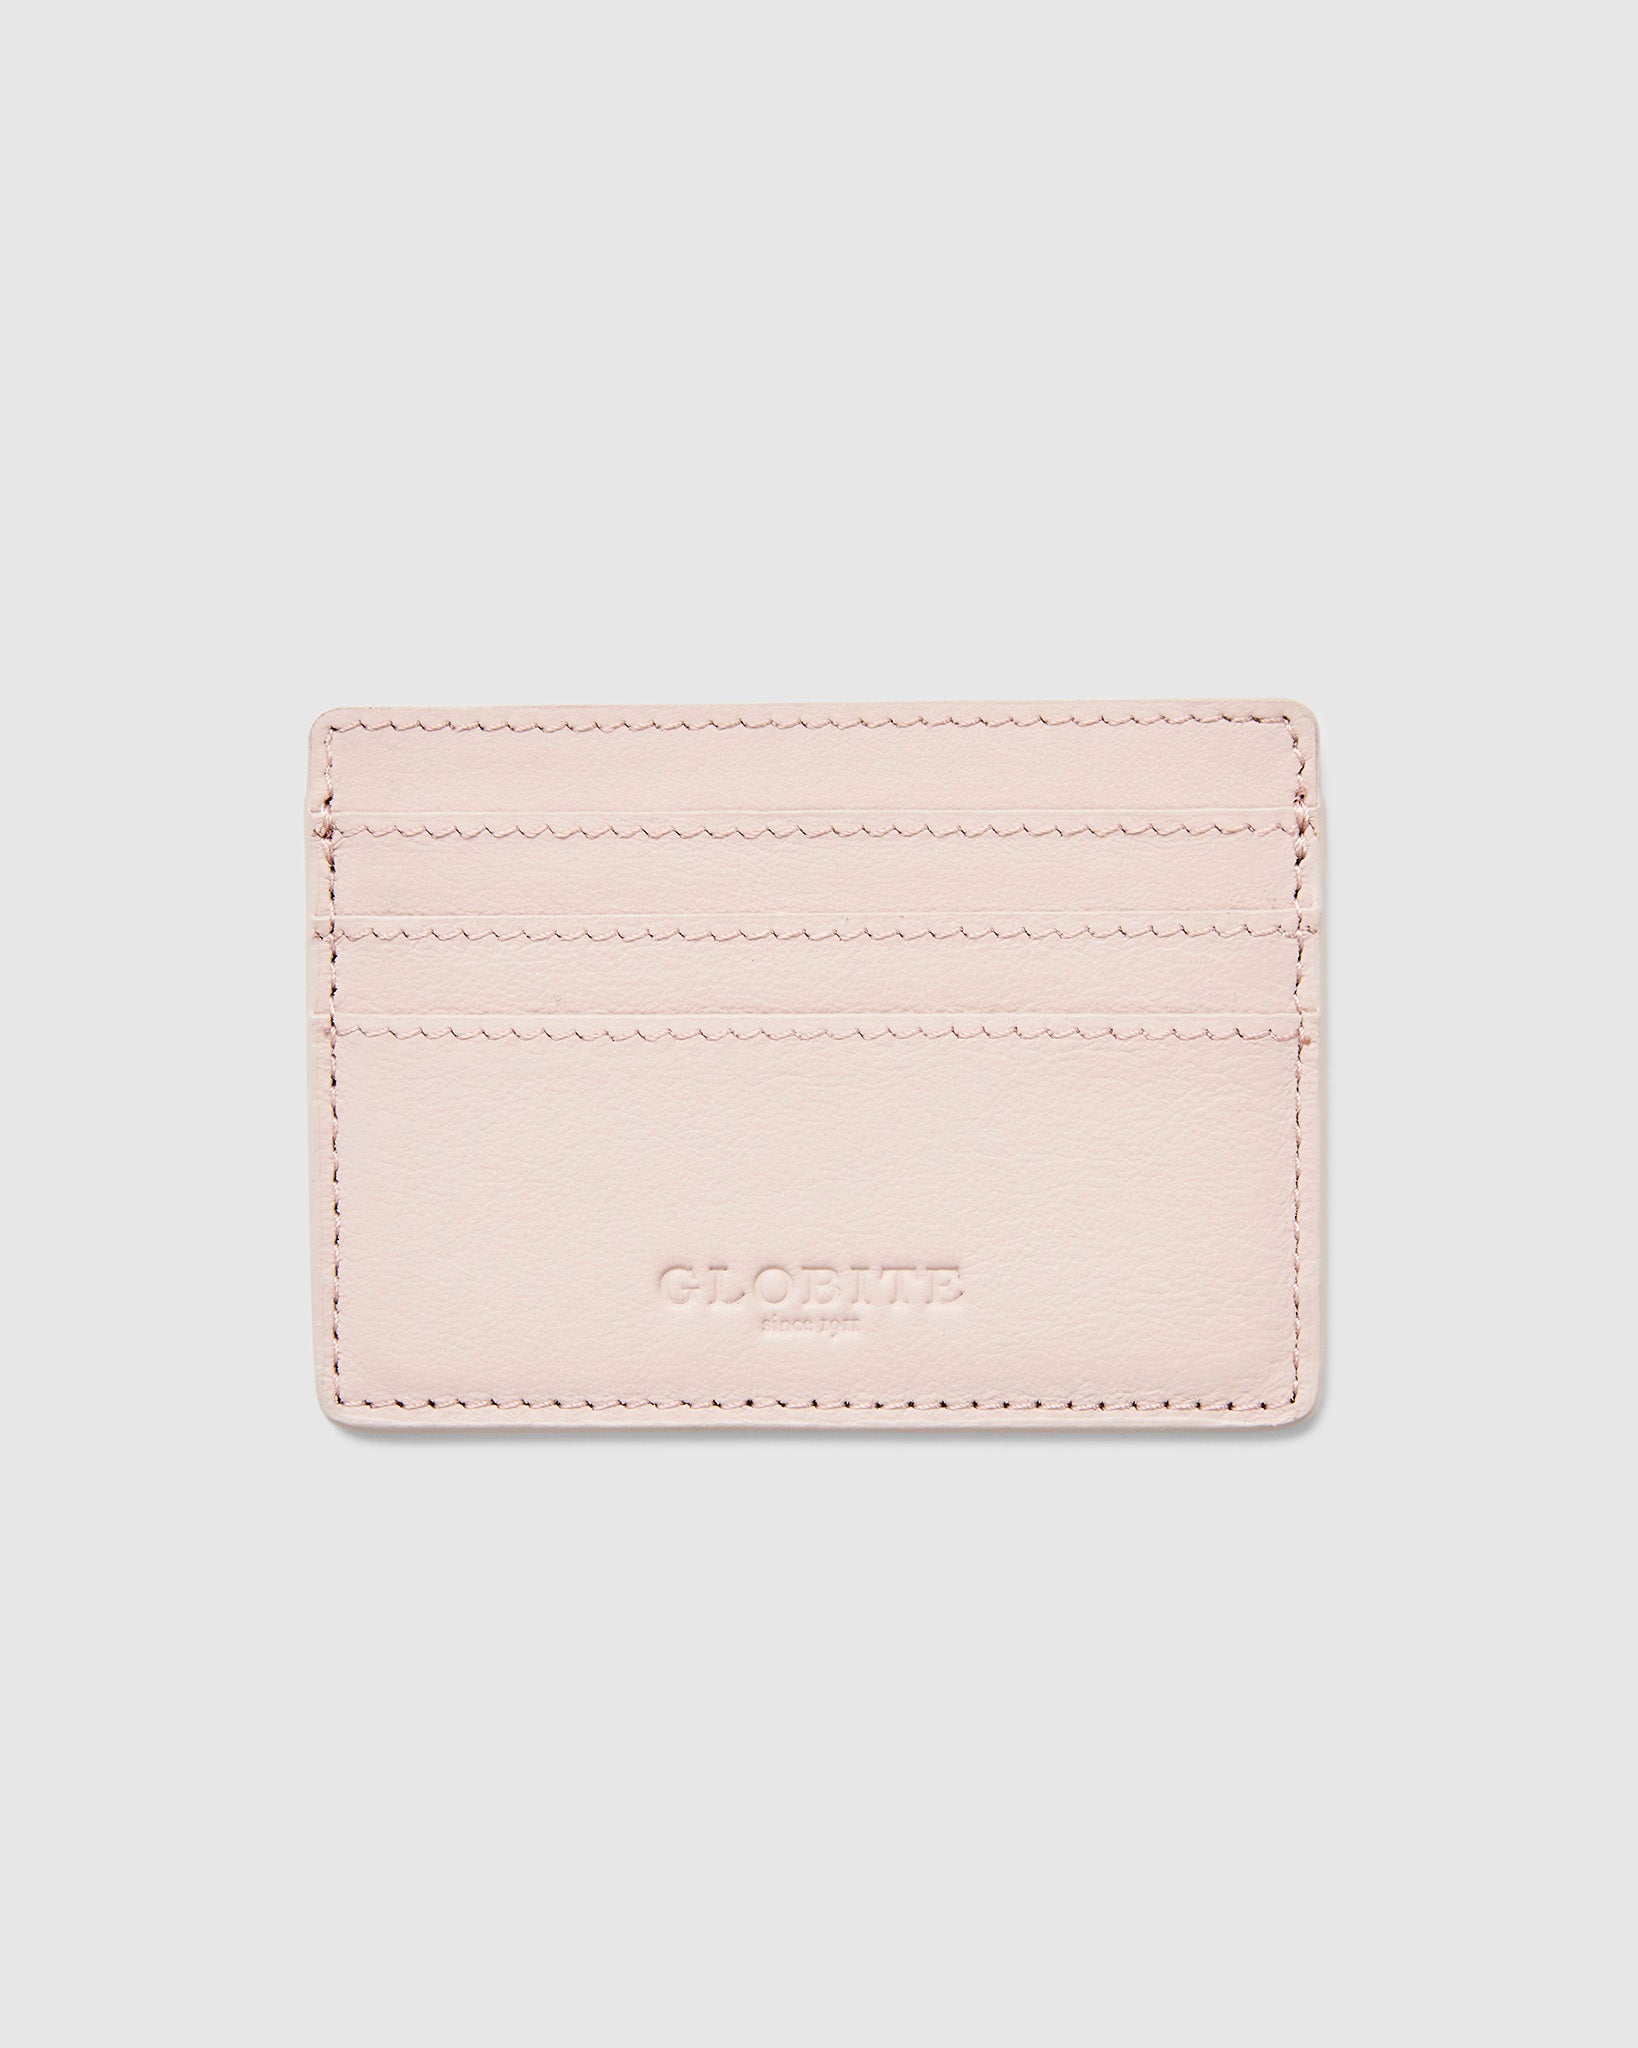 Leather Card Holder in Chic Rose